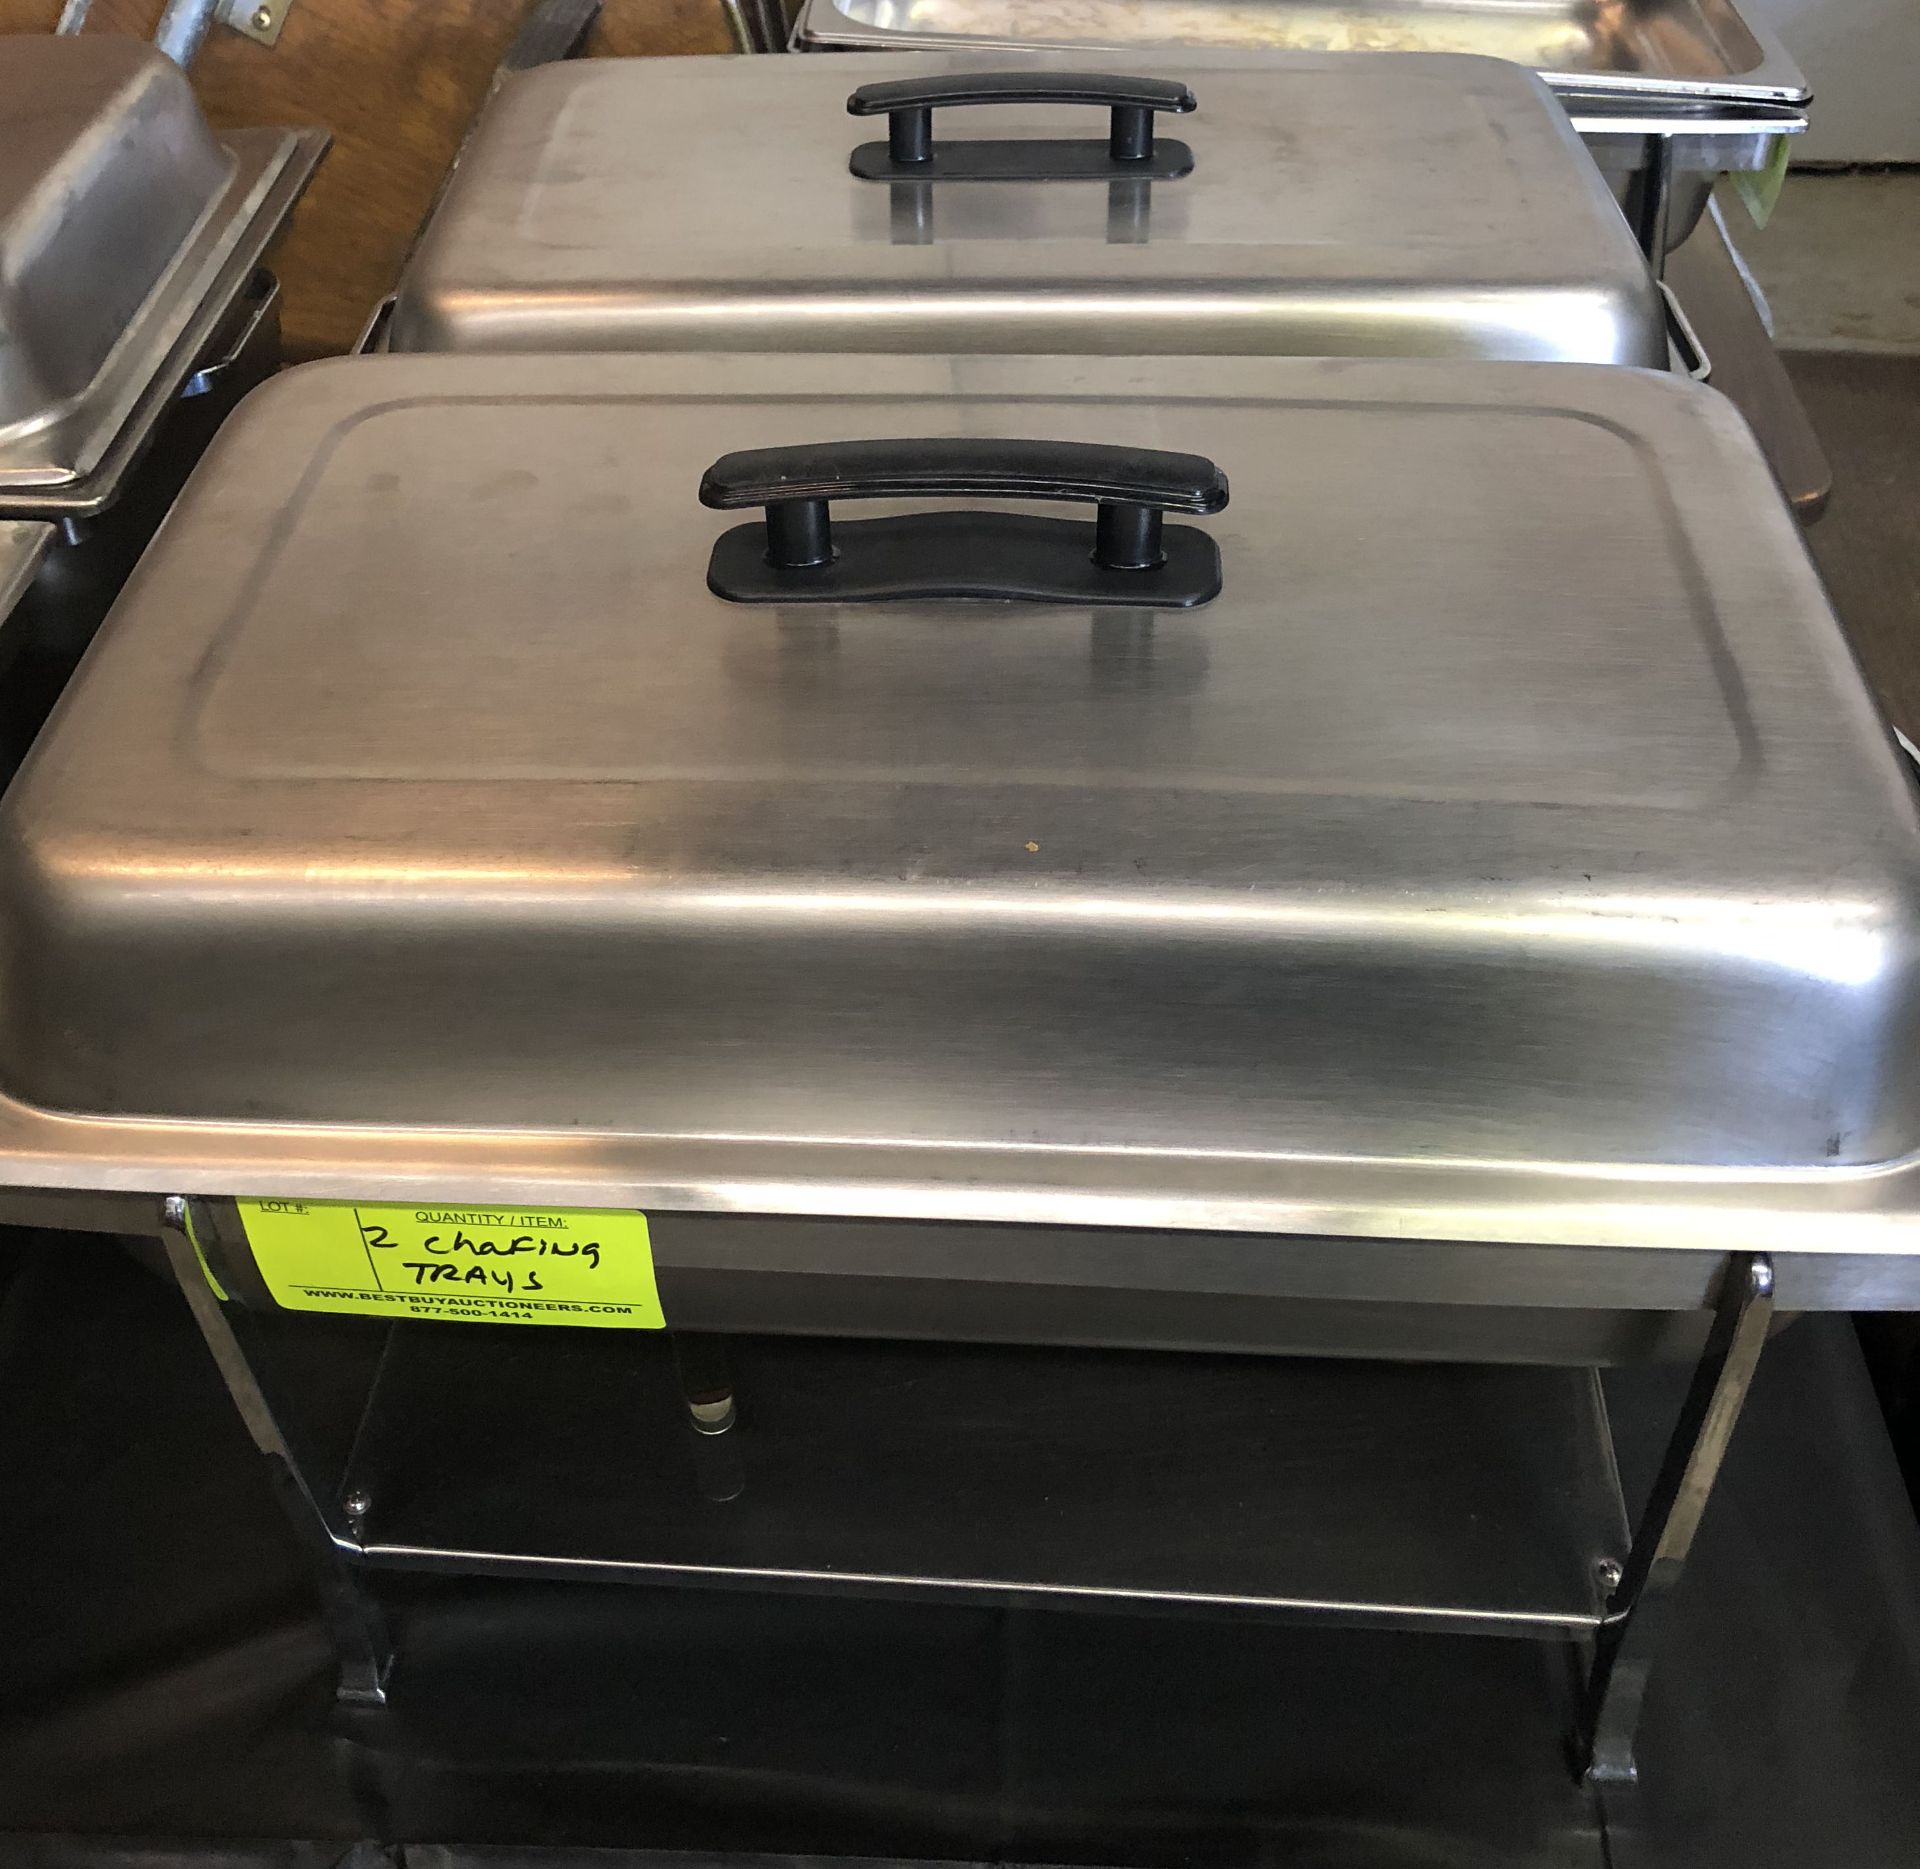 Lot 215 - set of 2 chafing dishes with black handles